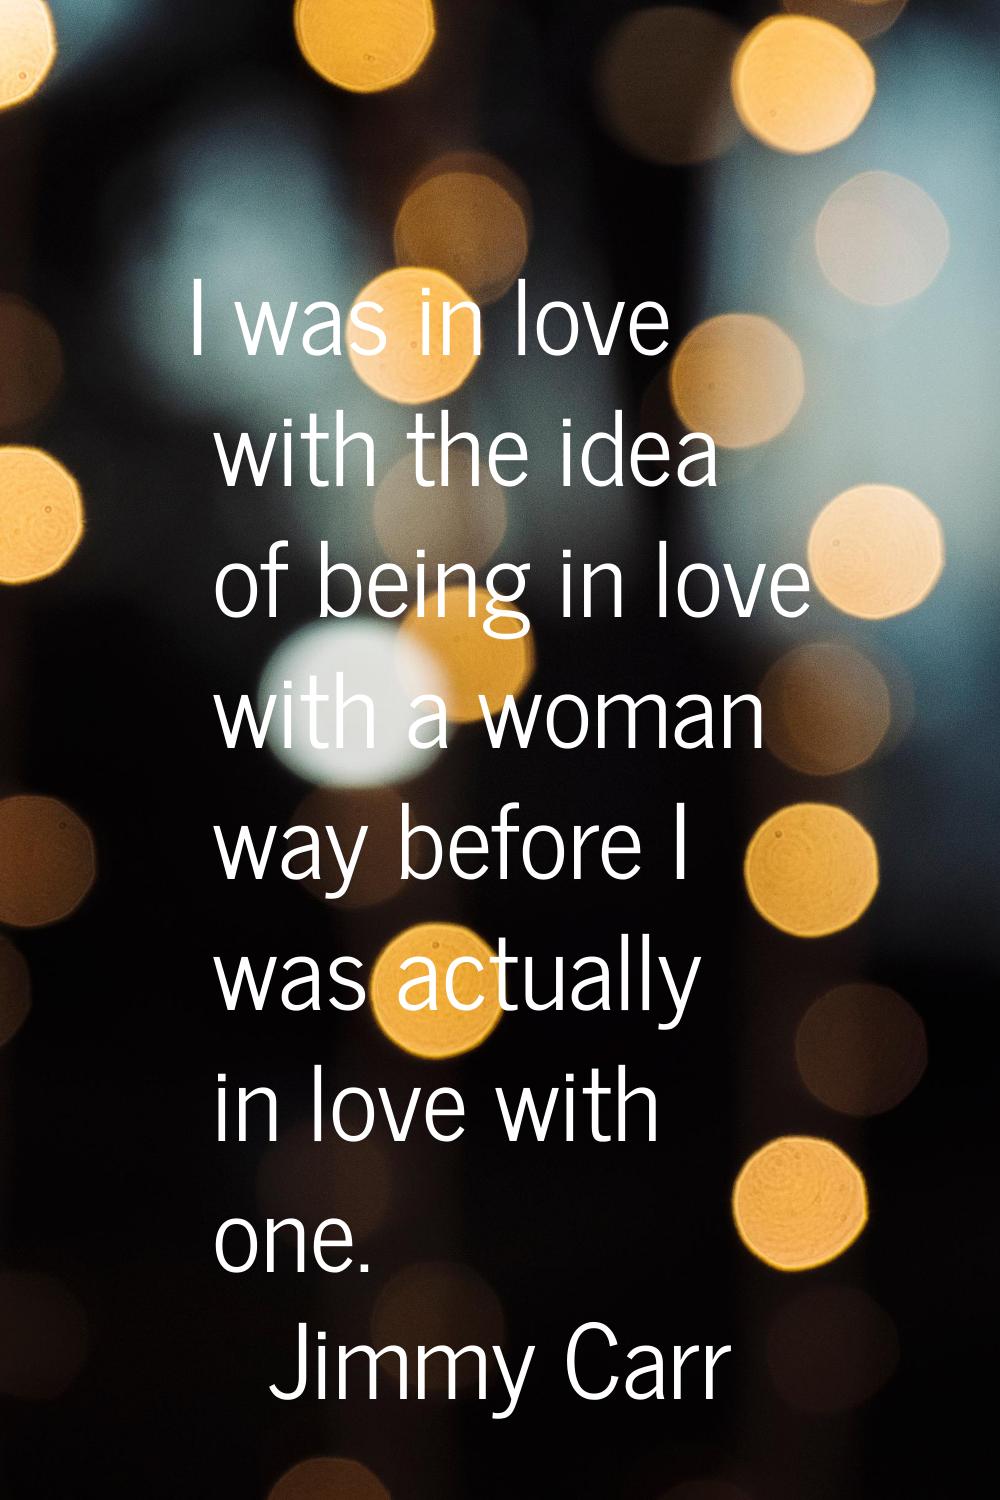 I was in love with the idea of being in love with a woman way before I was actually in love with on